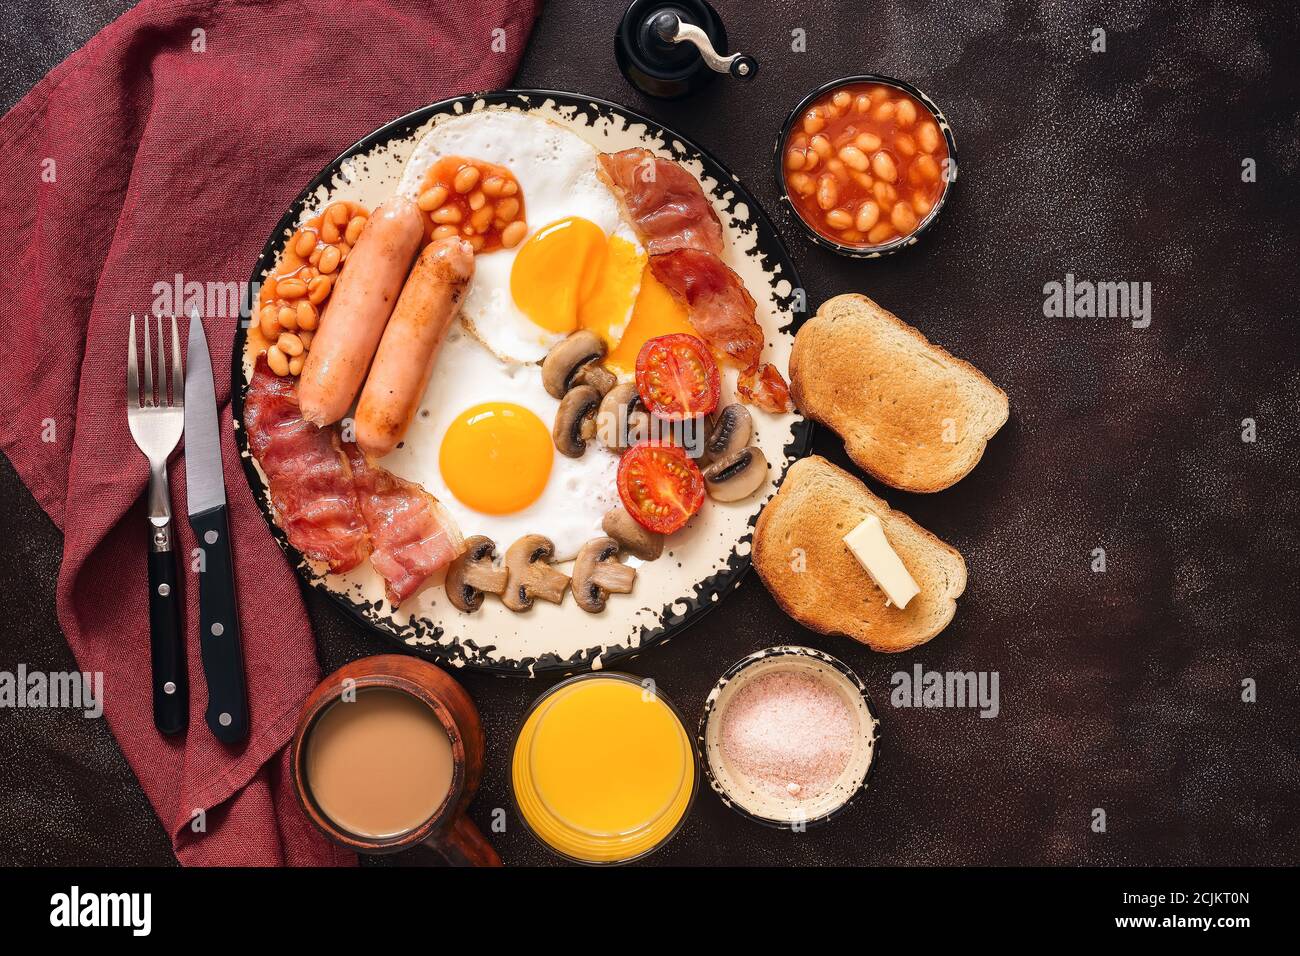 English traditional breakfast on a dark brown rustic background. Top view, flat lay. Fried eggs with bacon, sausages and beans, coffee, orange juice. Stock Photo